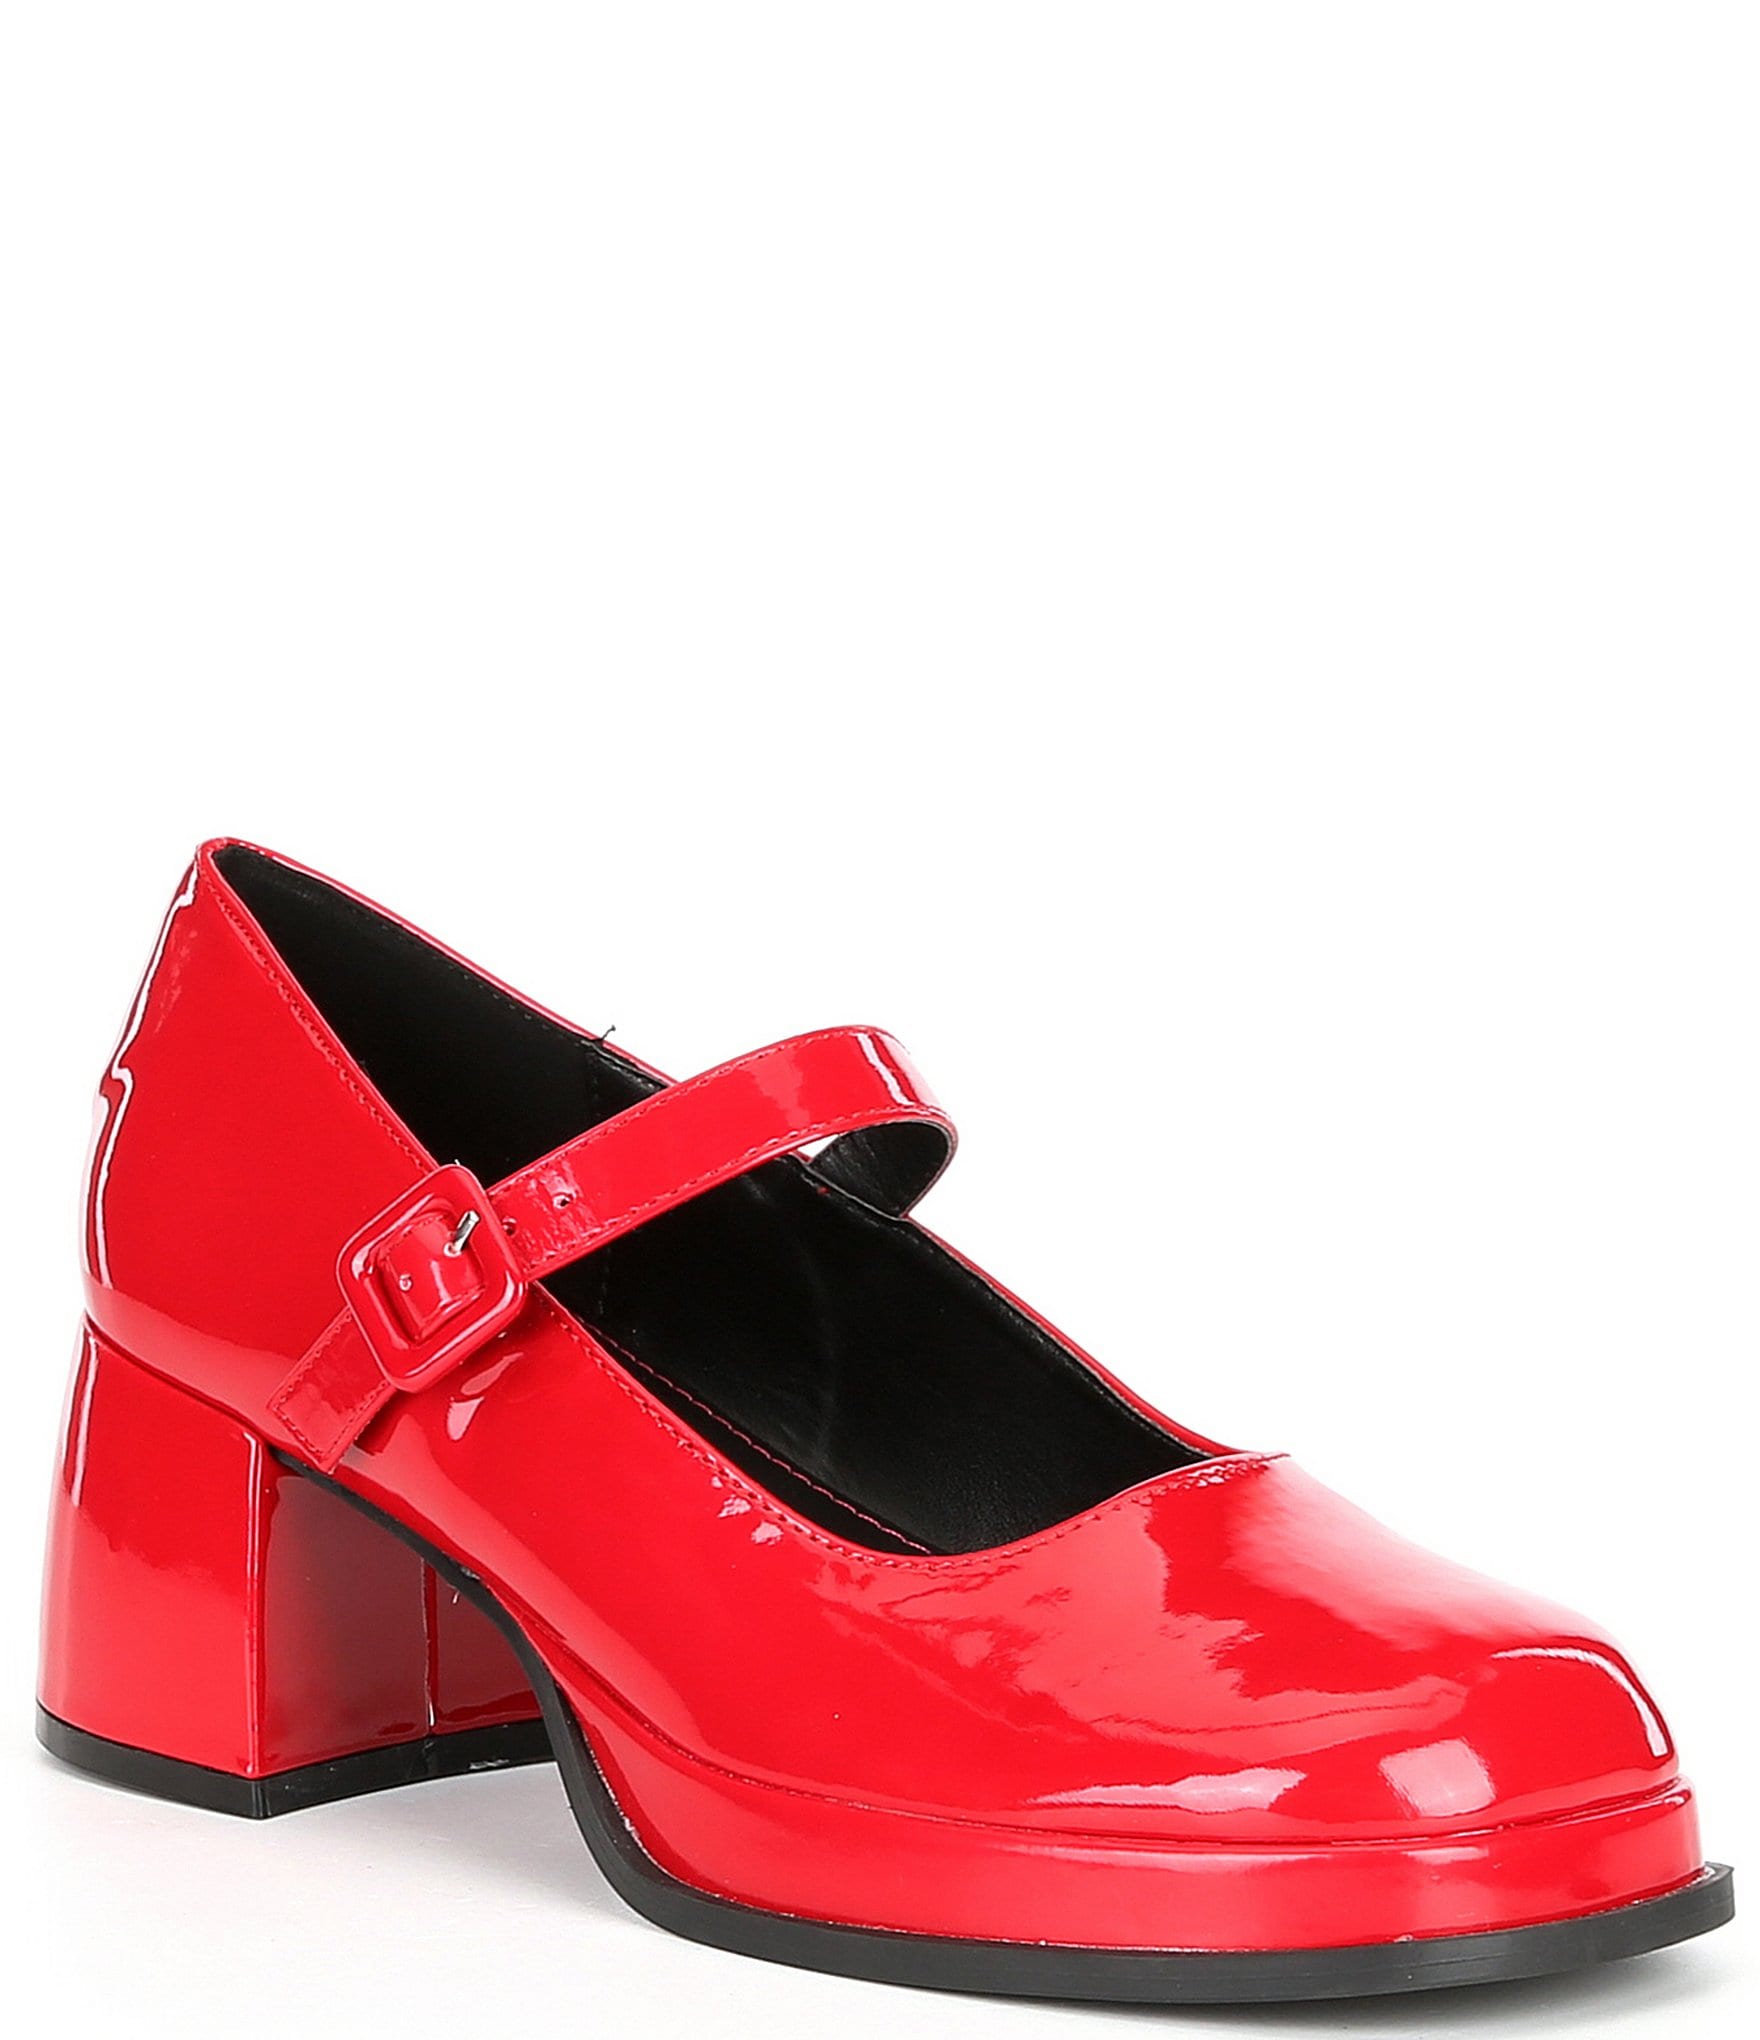 Girls Red Mary Jane Shoes | lupon.gov.ph